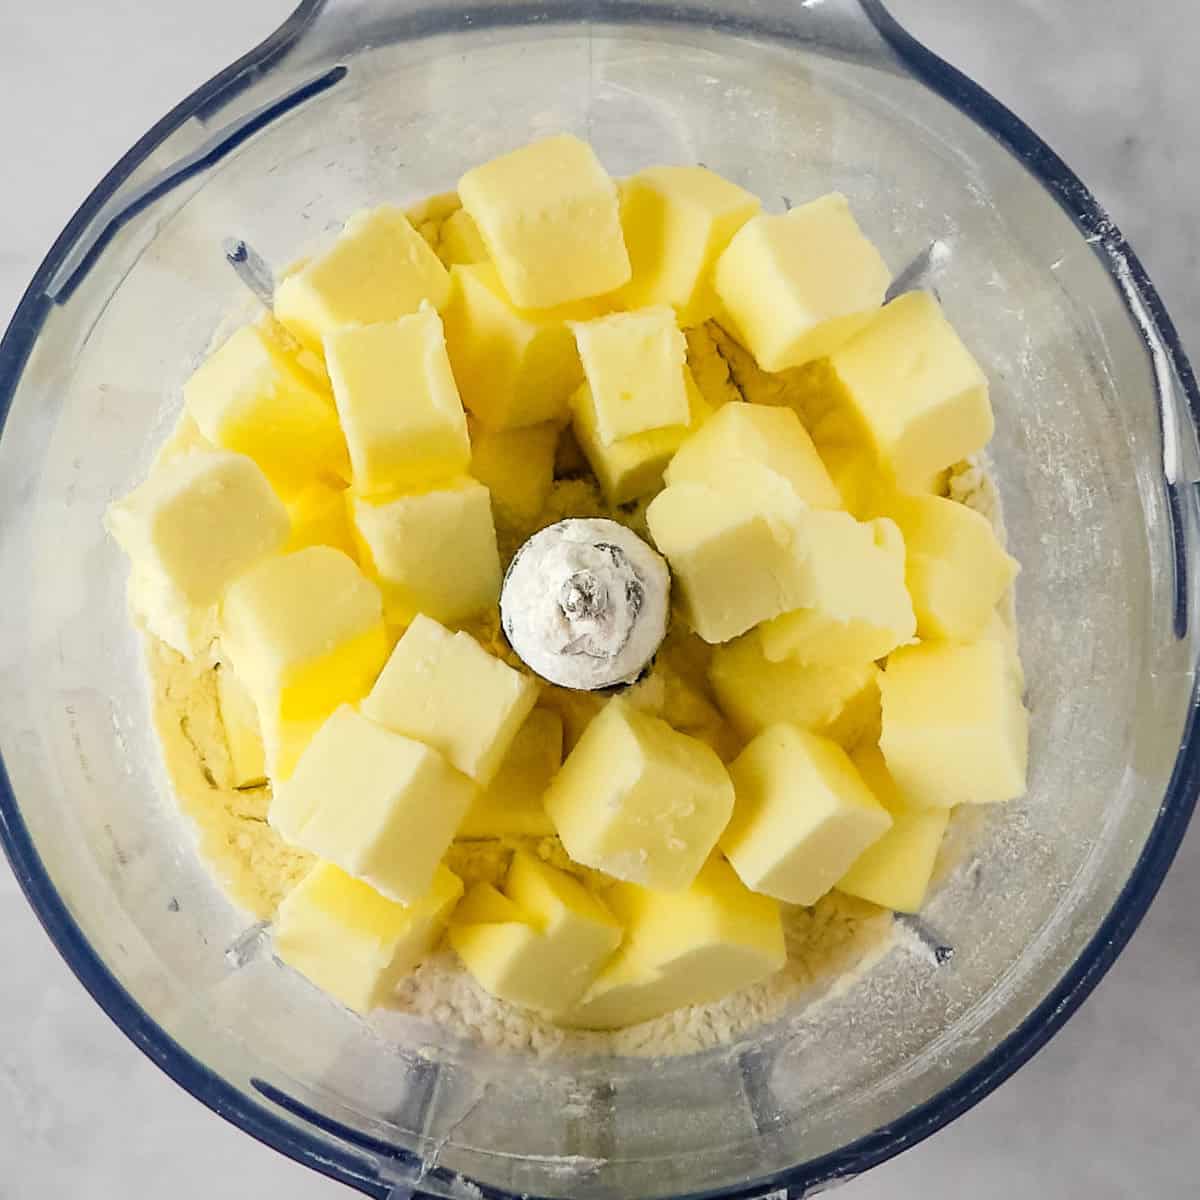 Self-rising flour and cubed butter in a food processor.